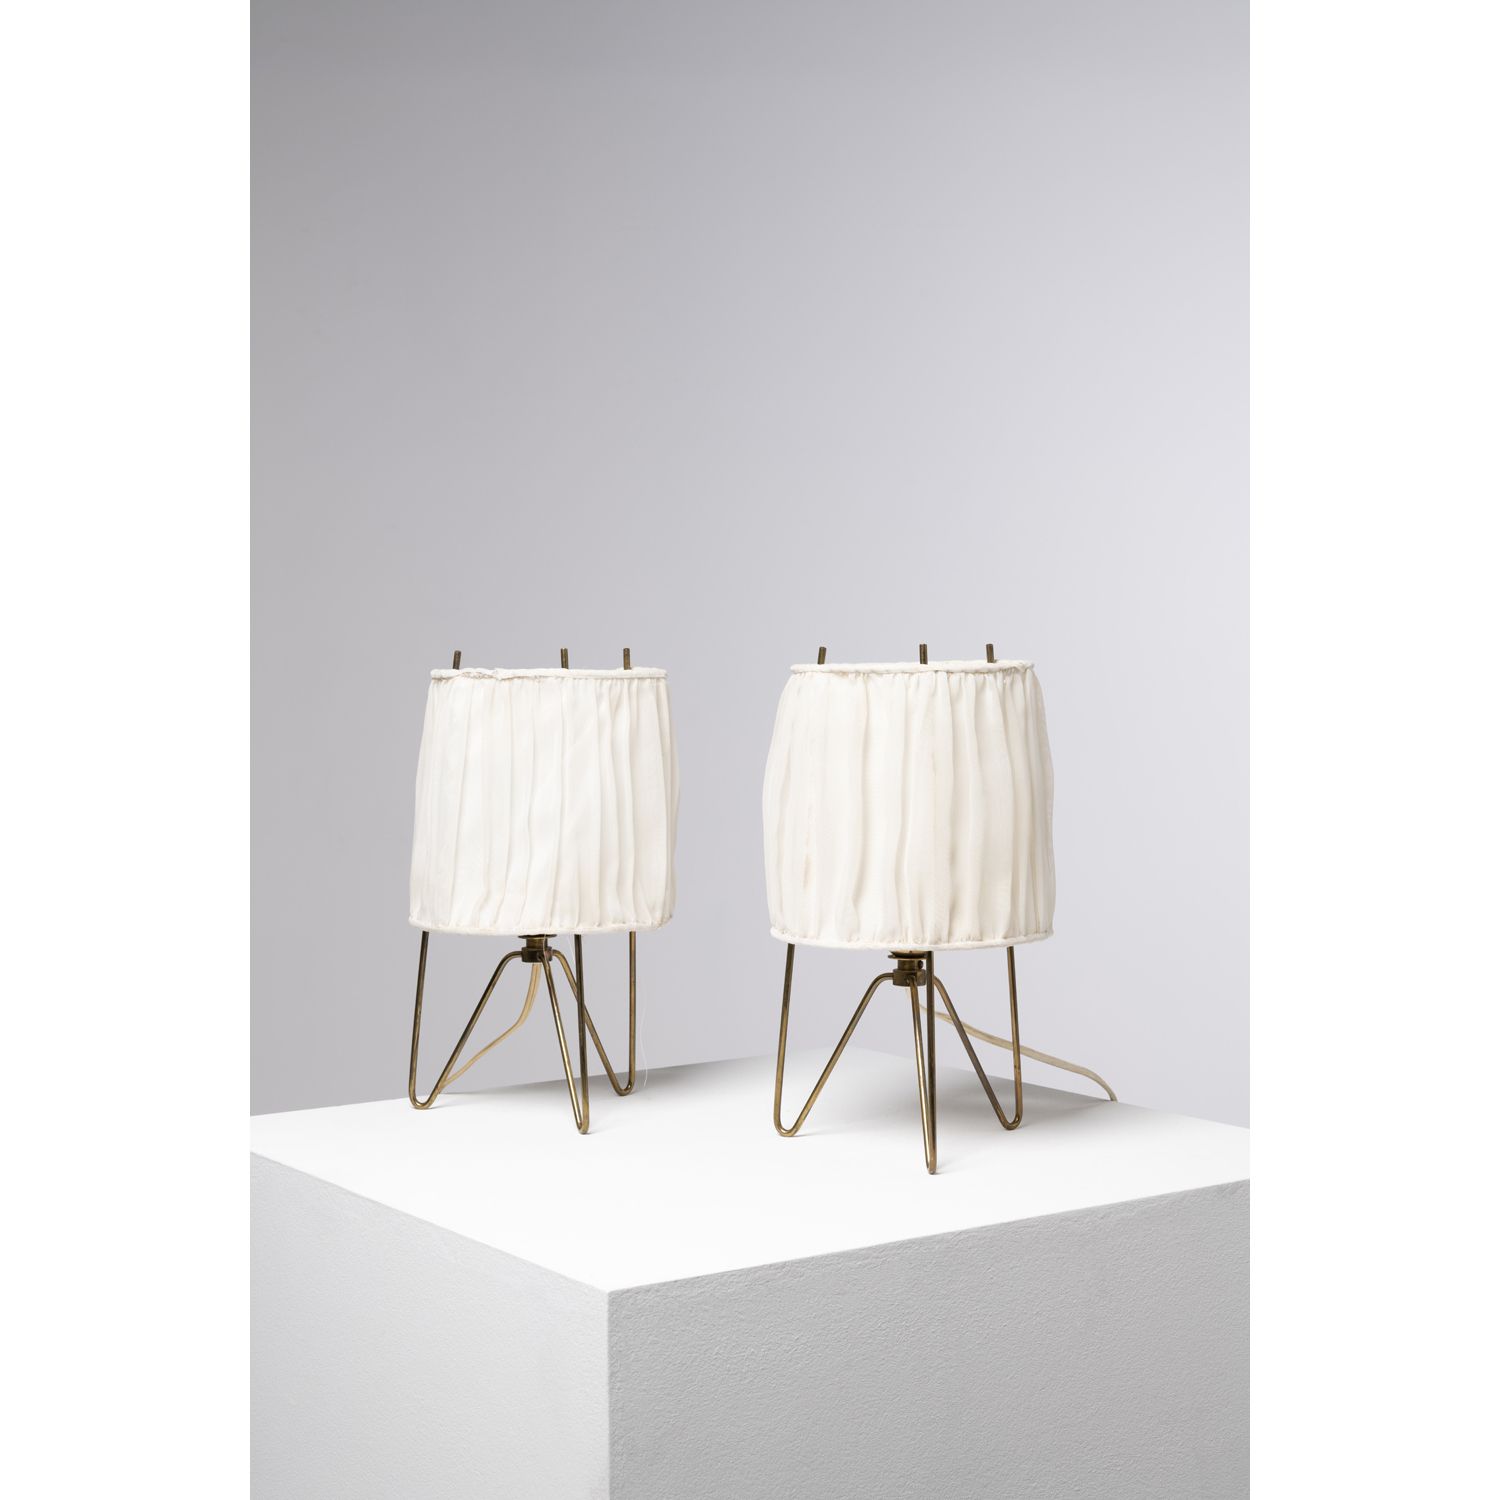 Null Bertil Brisborg (1910-1993)

Pair of table lamps

Brass and fabric

Edited &hellip;